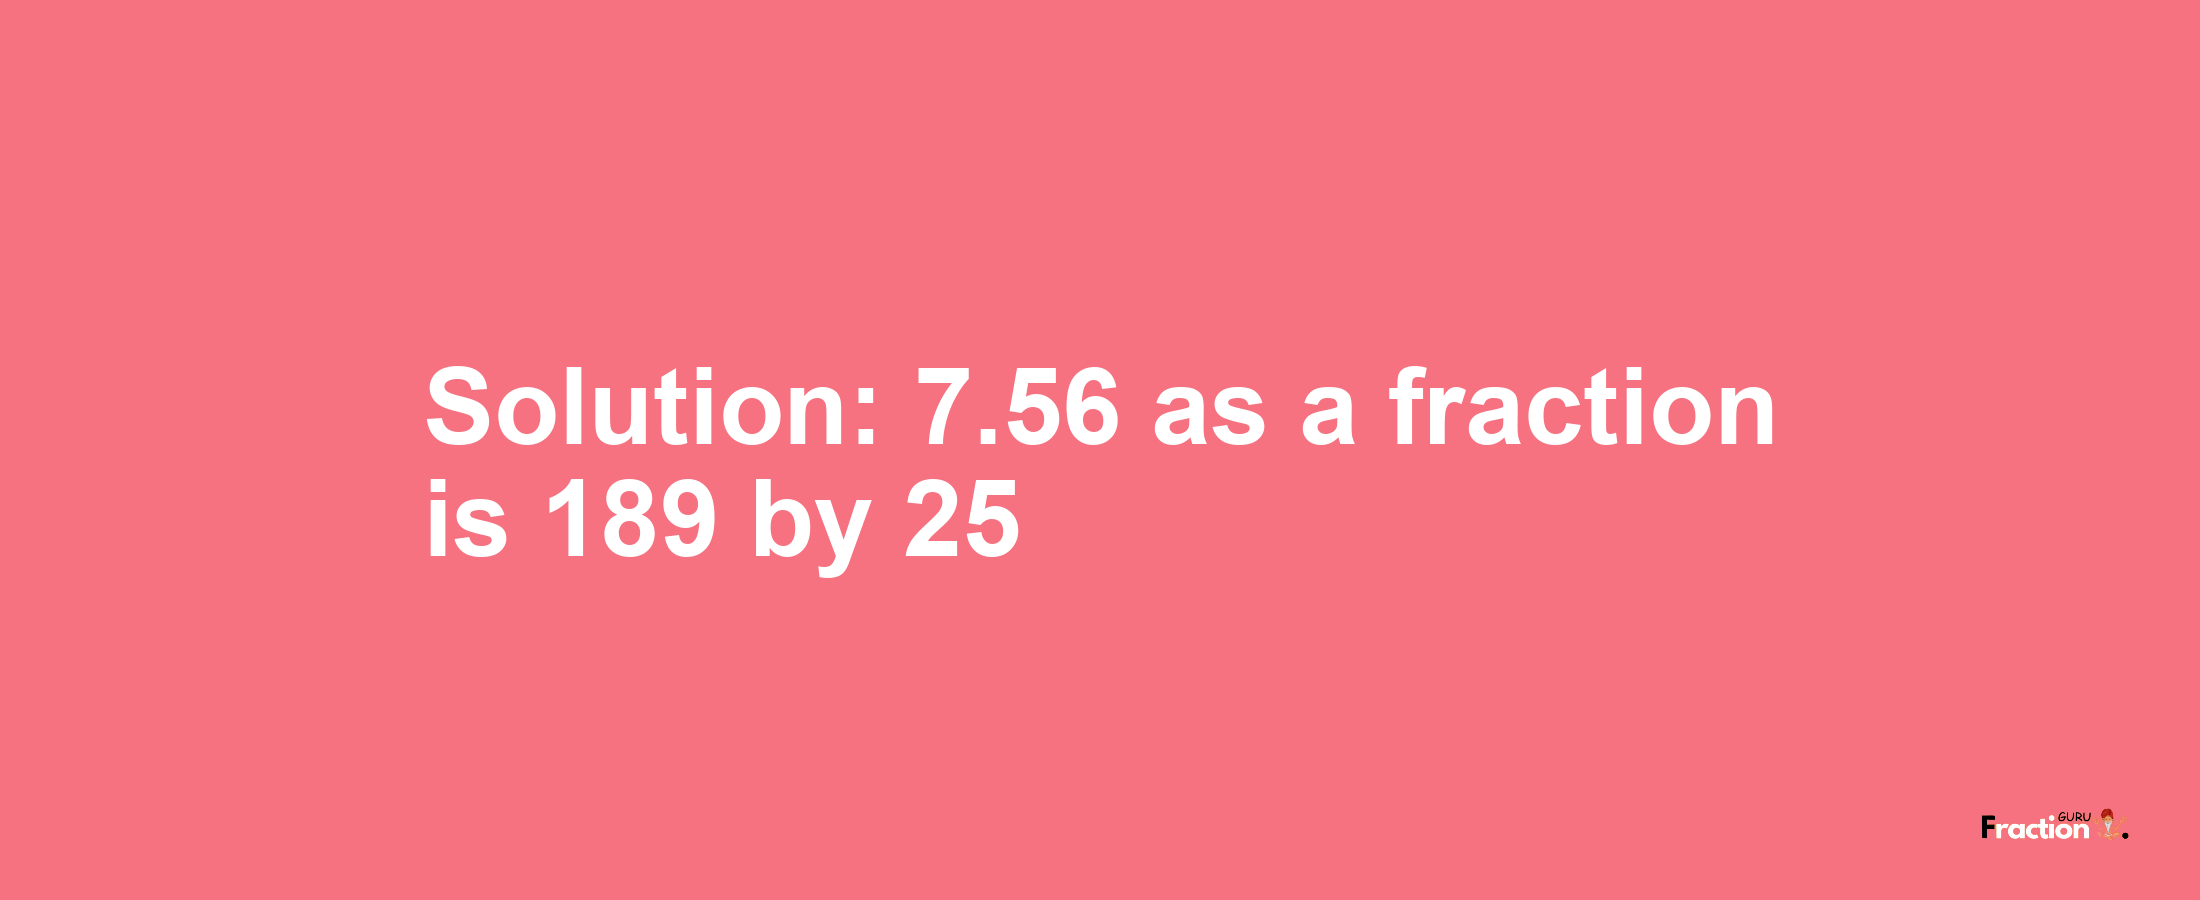 Solution:7.56 as a fraction is 189/25